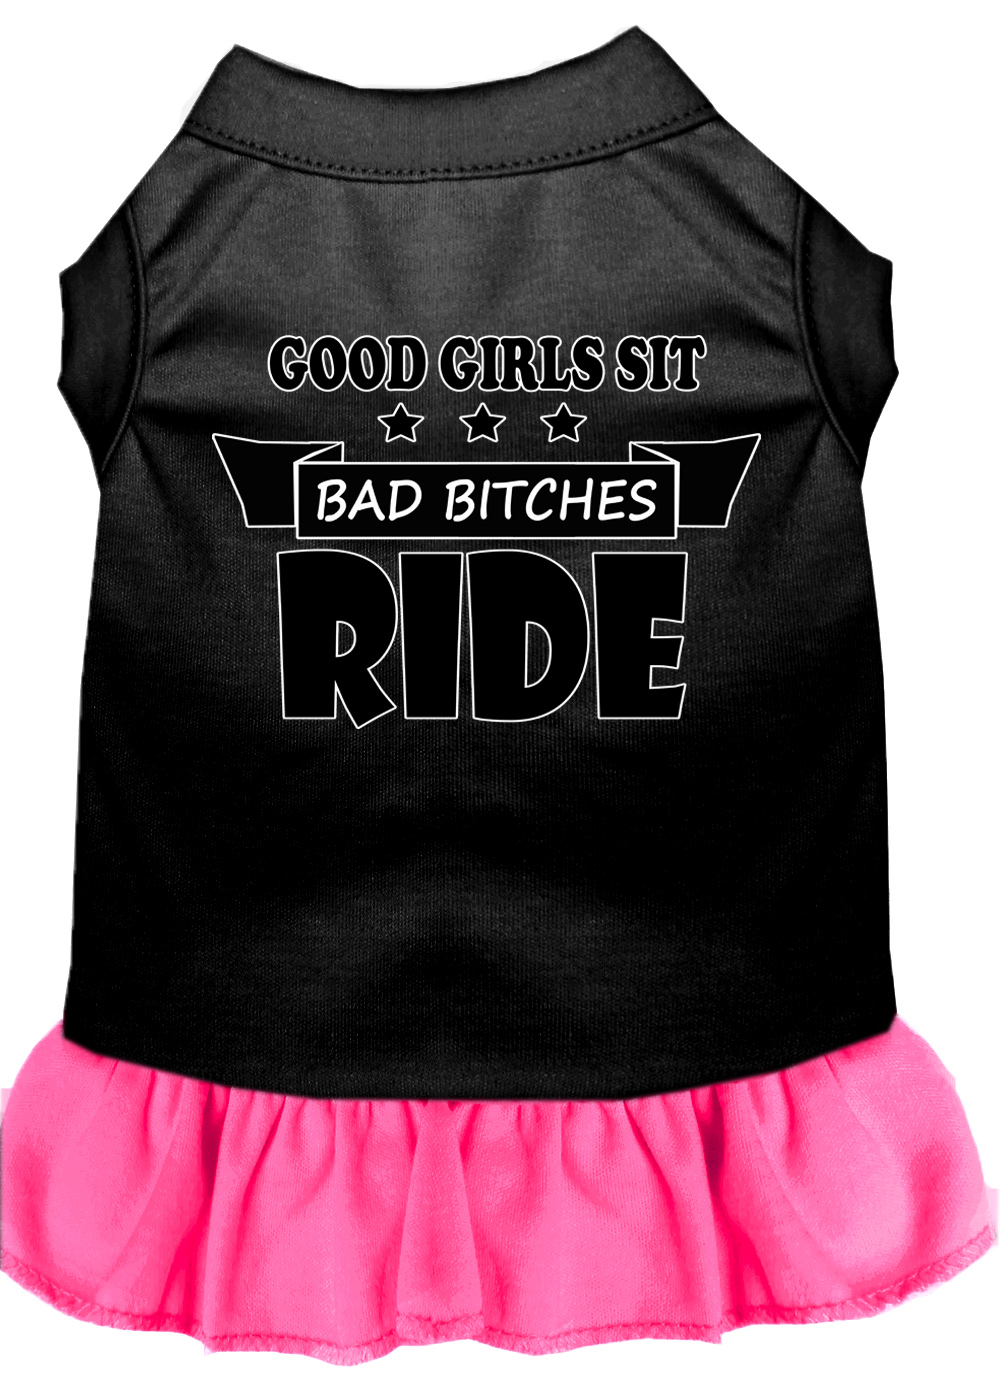 Bitches Ride Screen Print Dog Dress Black with Bright Pink Lg